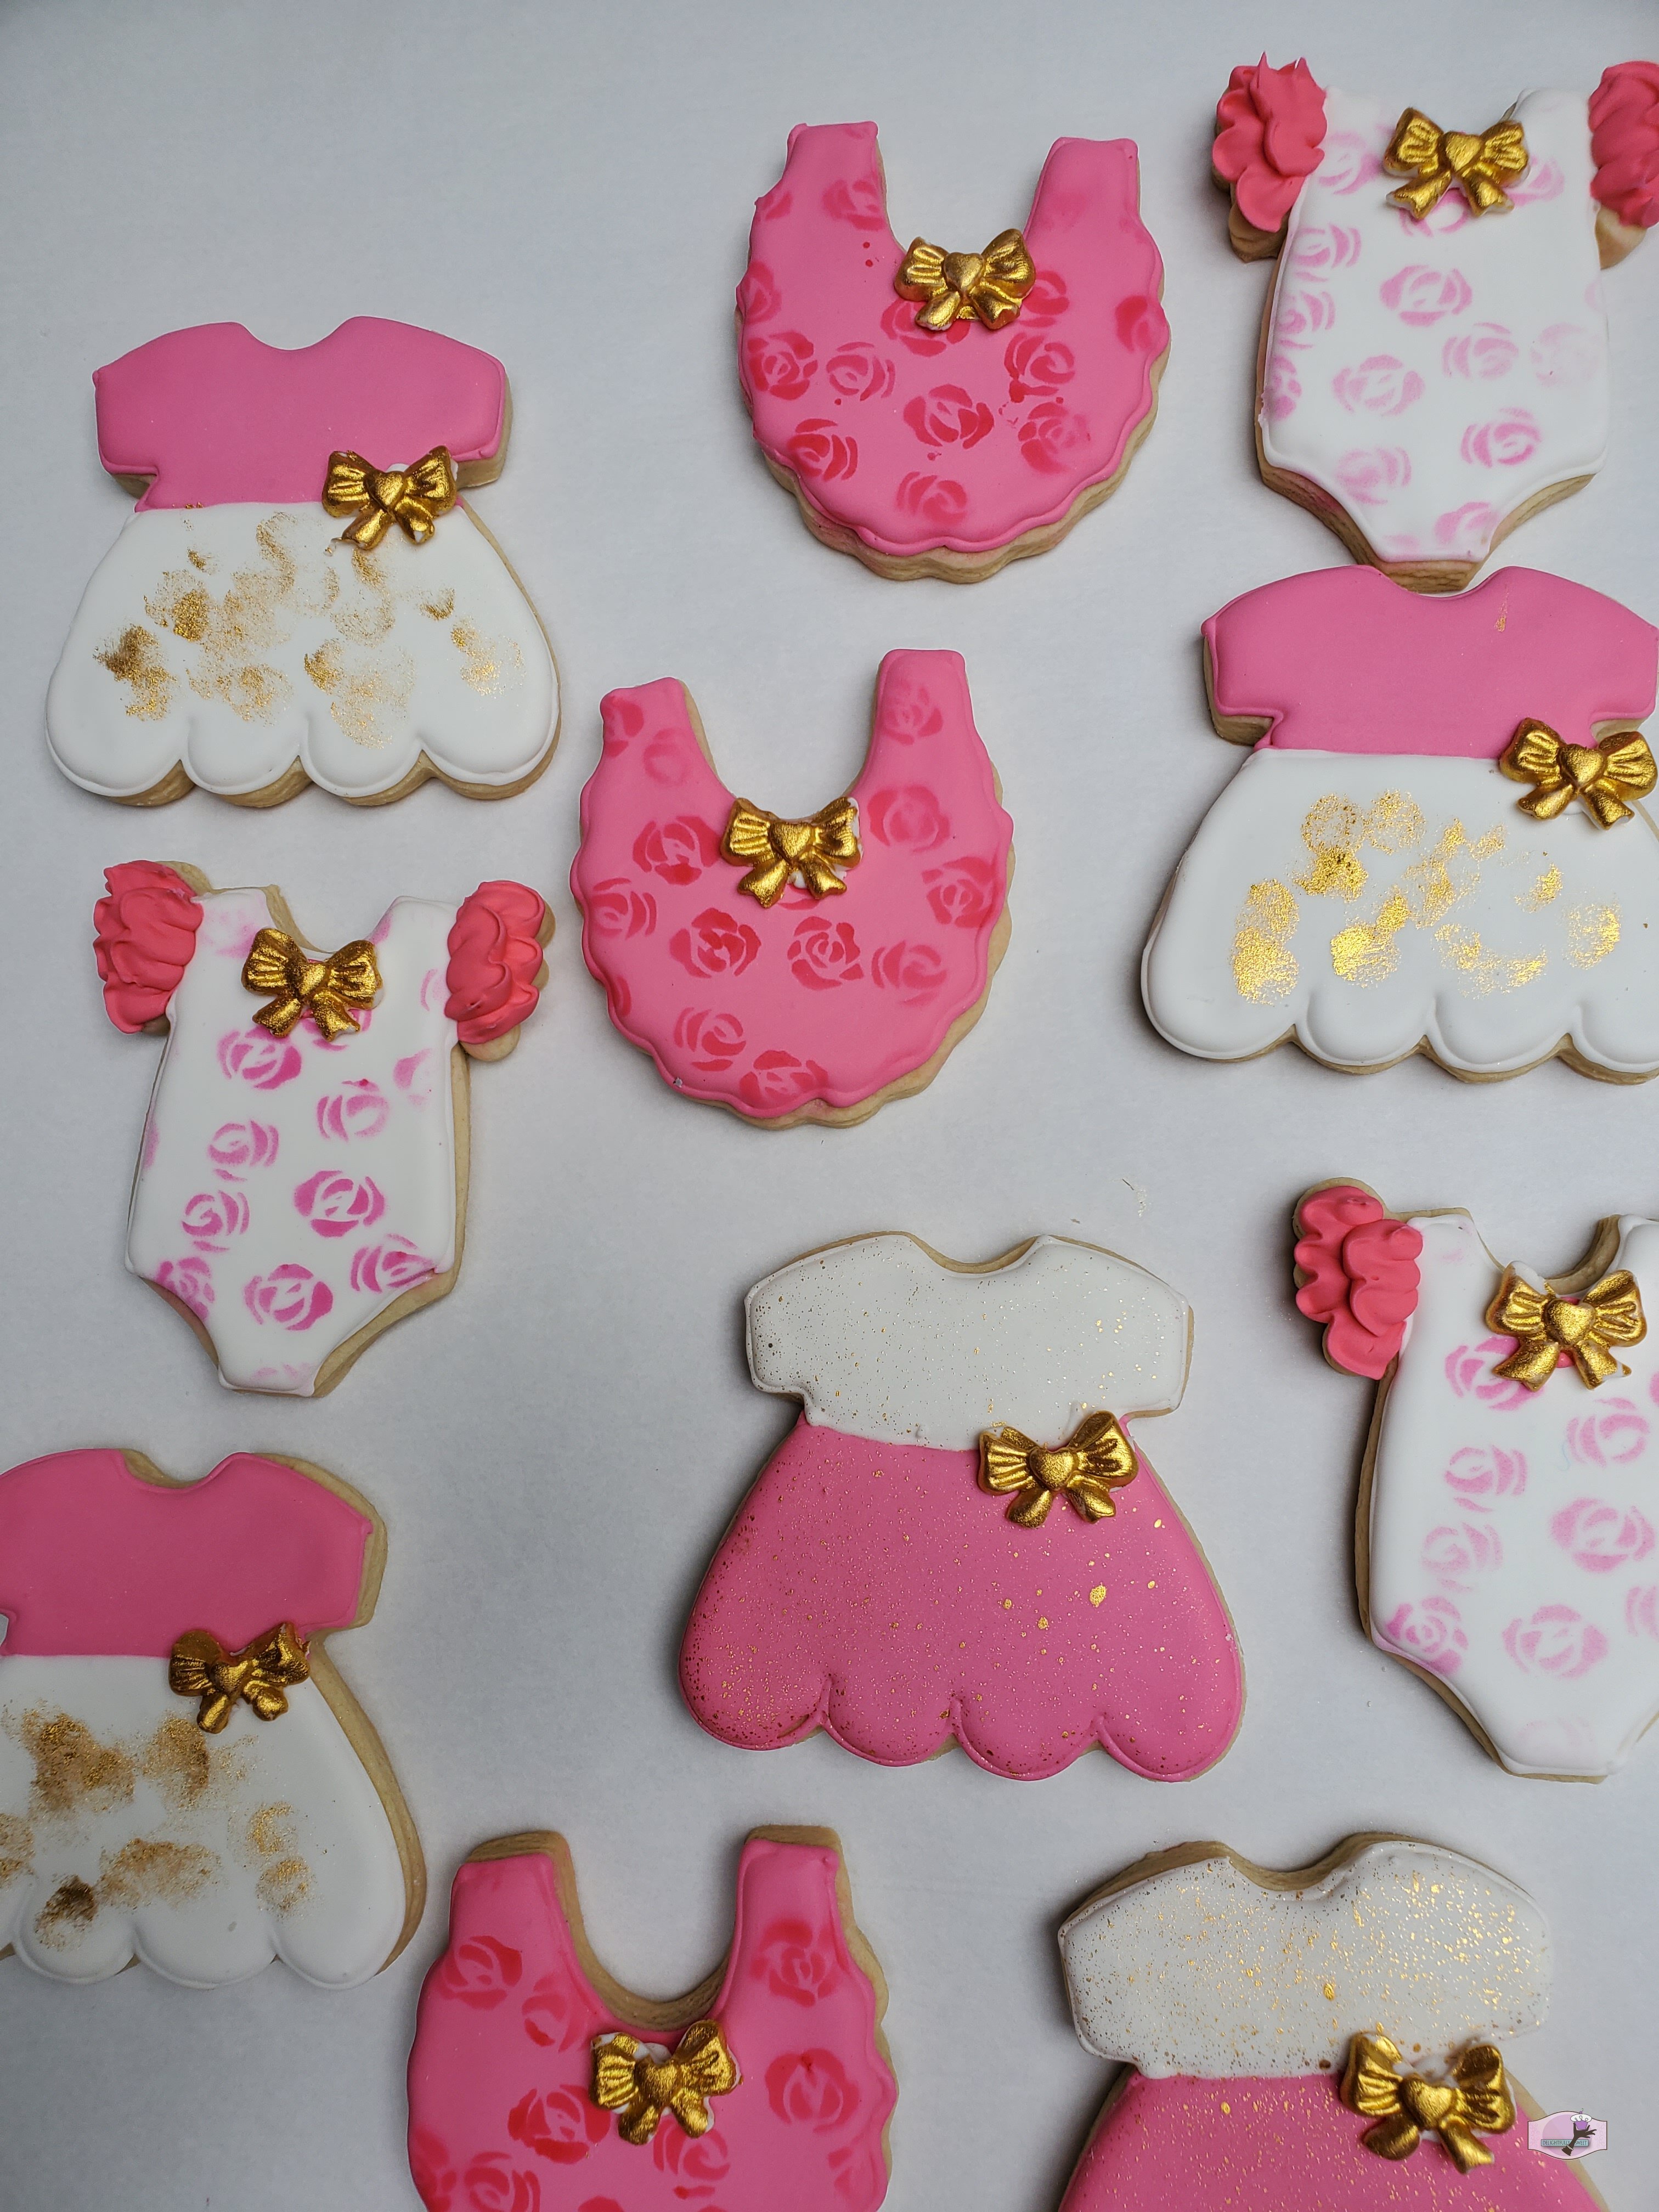 1/DZ Baby Shower Cookies Baby Outfit Cookies on Hangers 